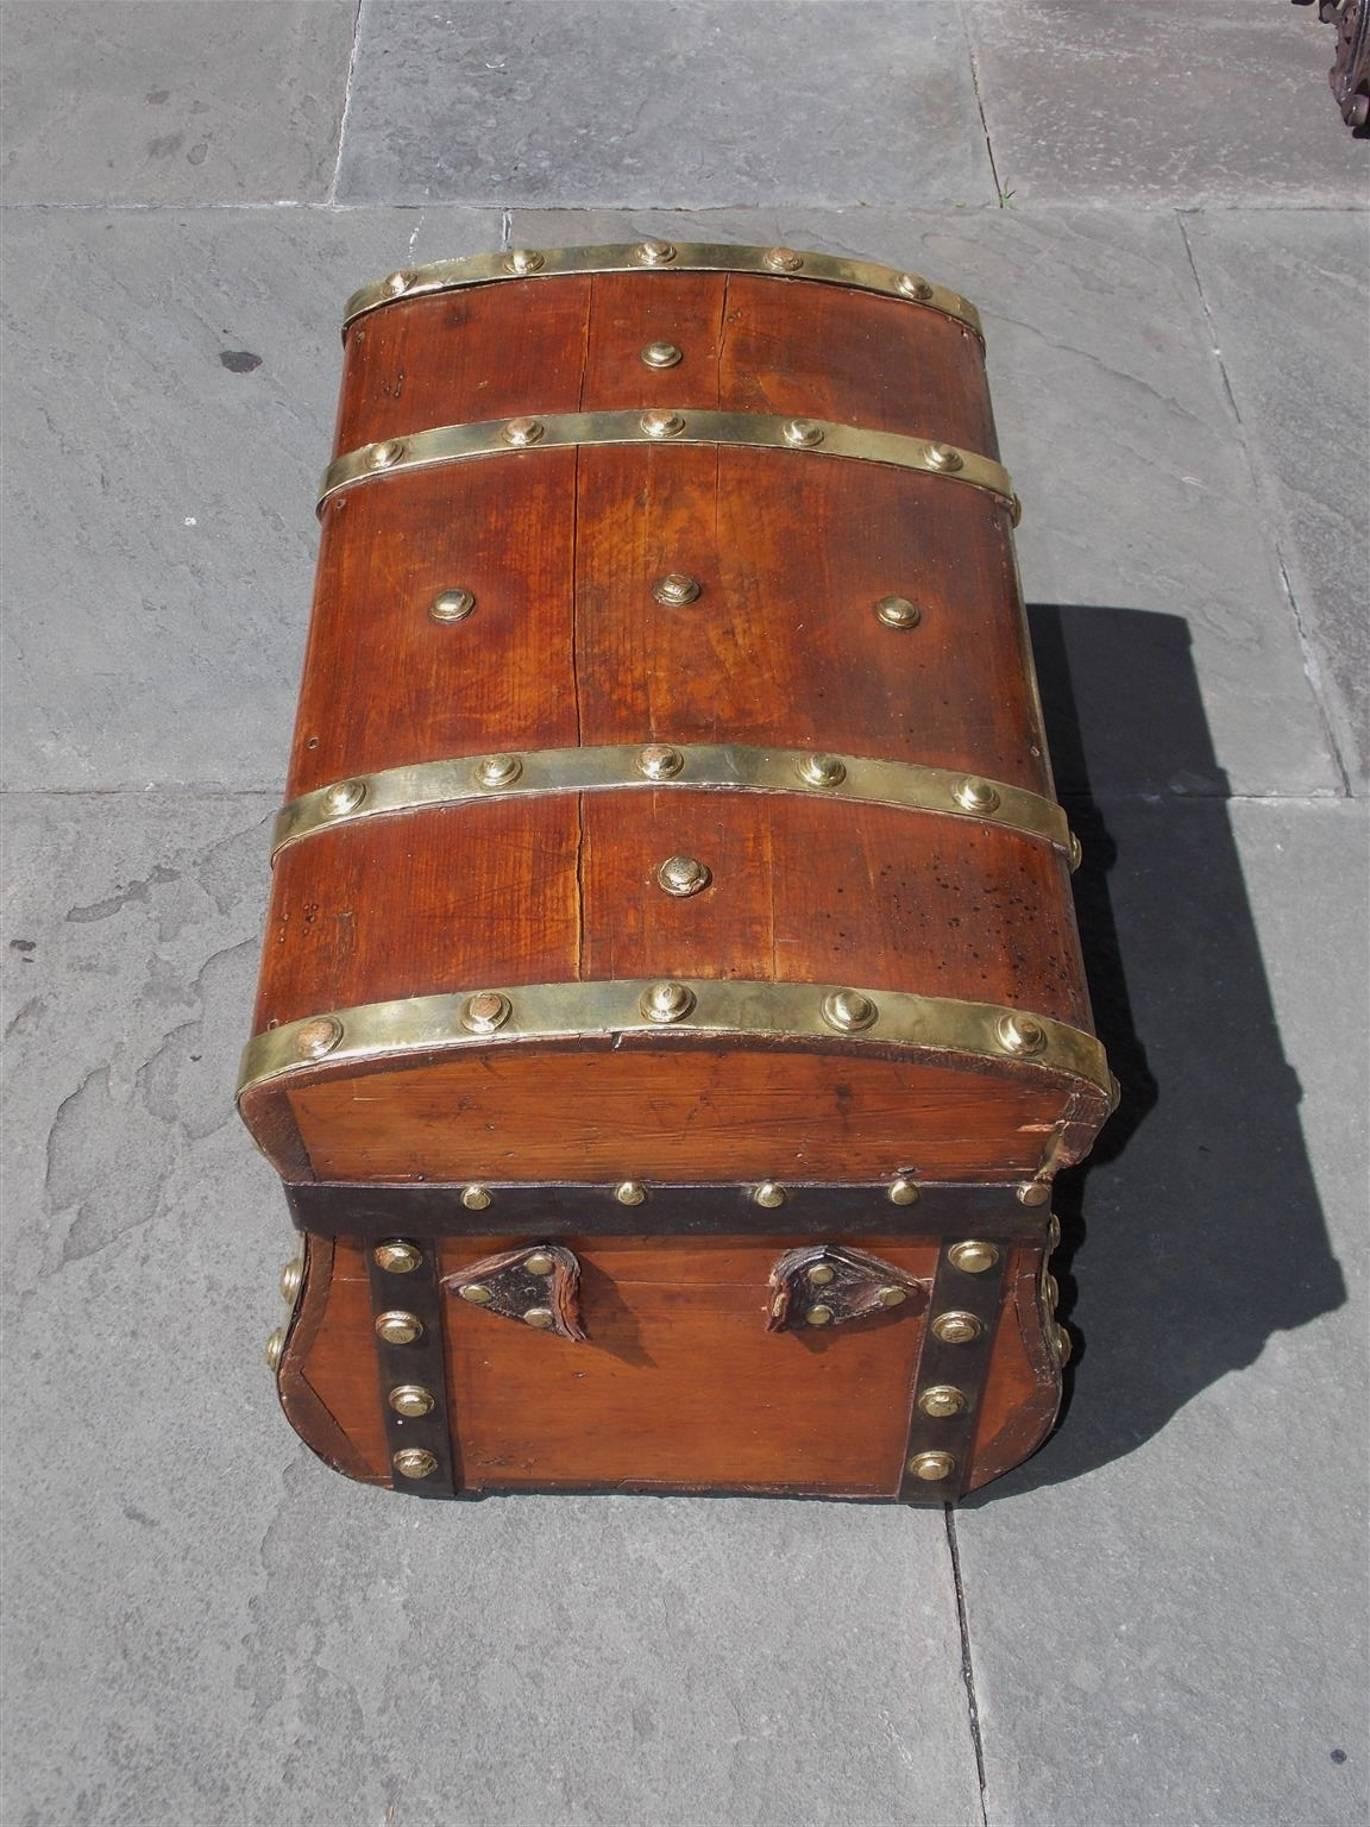 Hand-Carved American White Pine Brass and Leather Mounted Traveling Trunk, Circa 1800